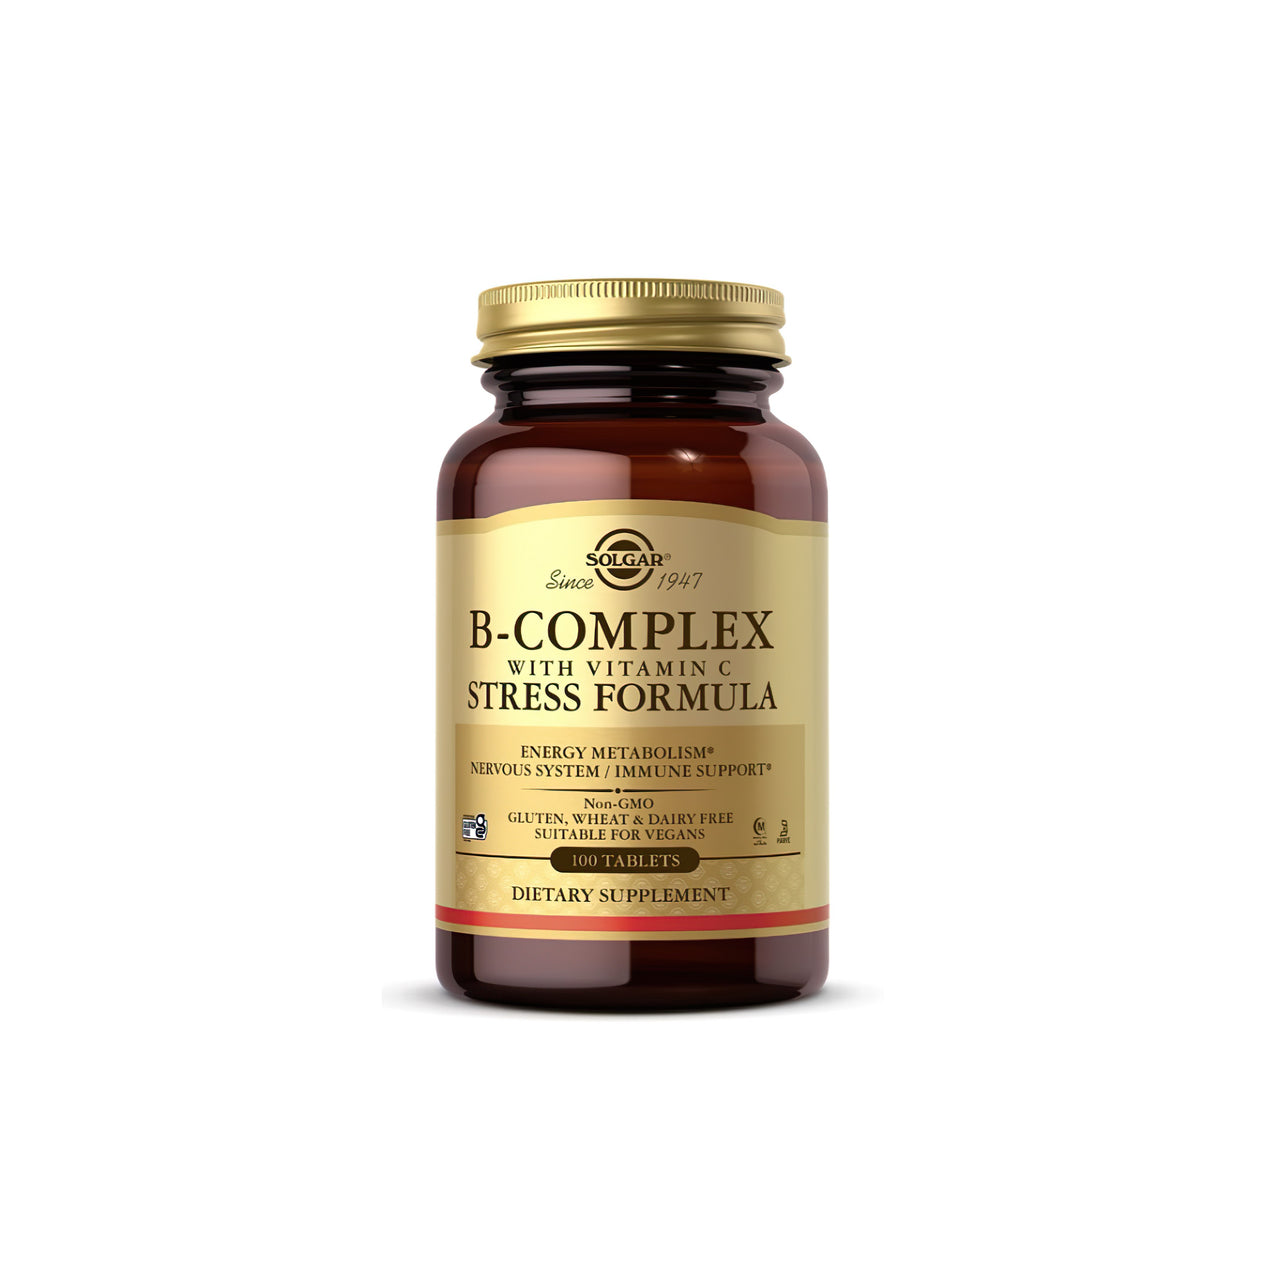 A dietary supplement - Solgar B-Complex with Vitamin C 100 Tablets.